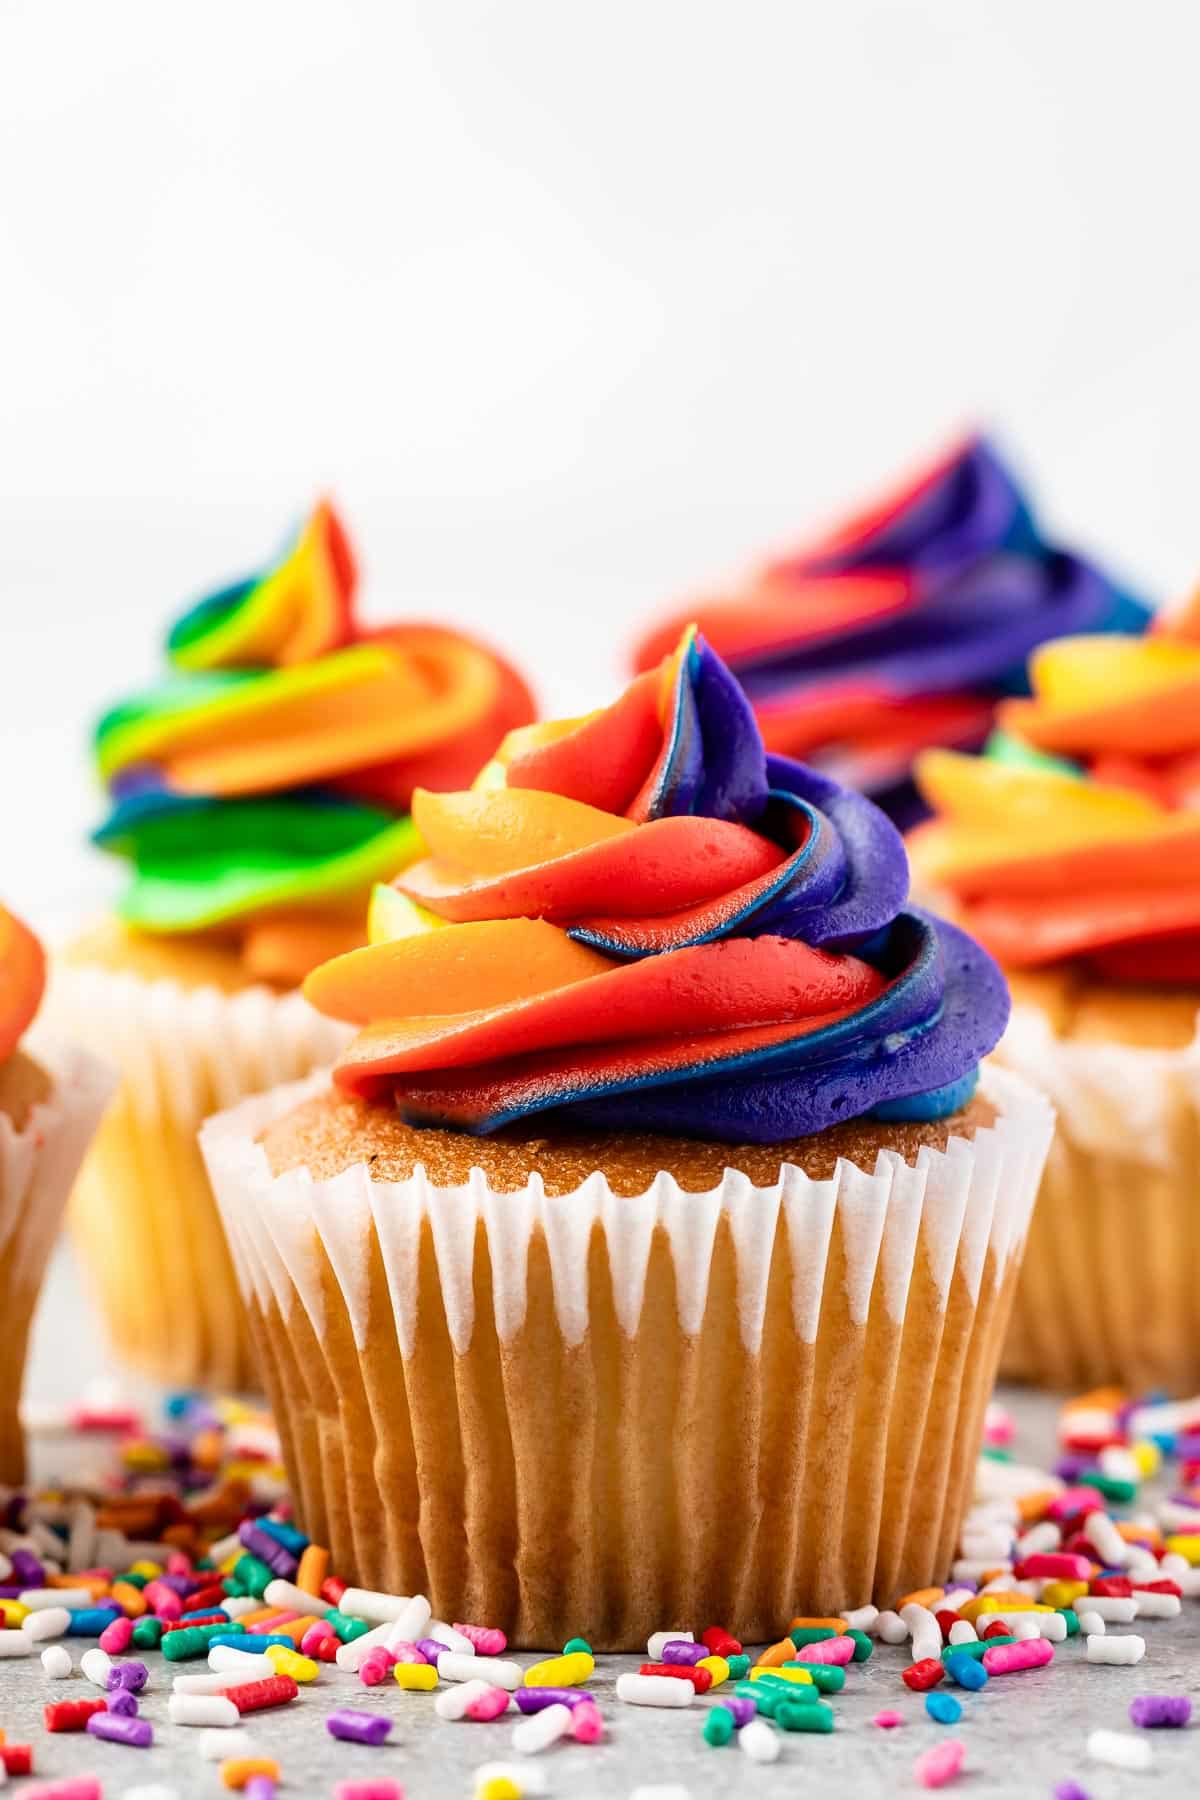 vanilla cupcakes with rainbow colored frosting on top.